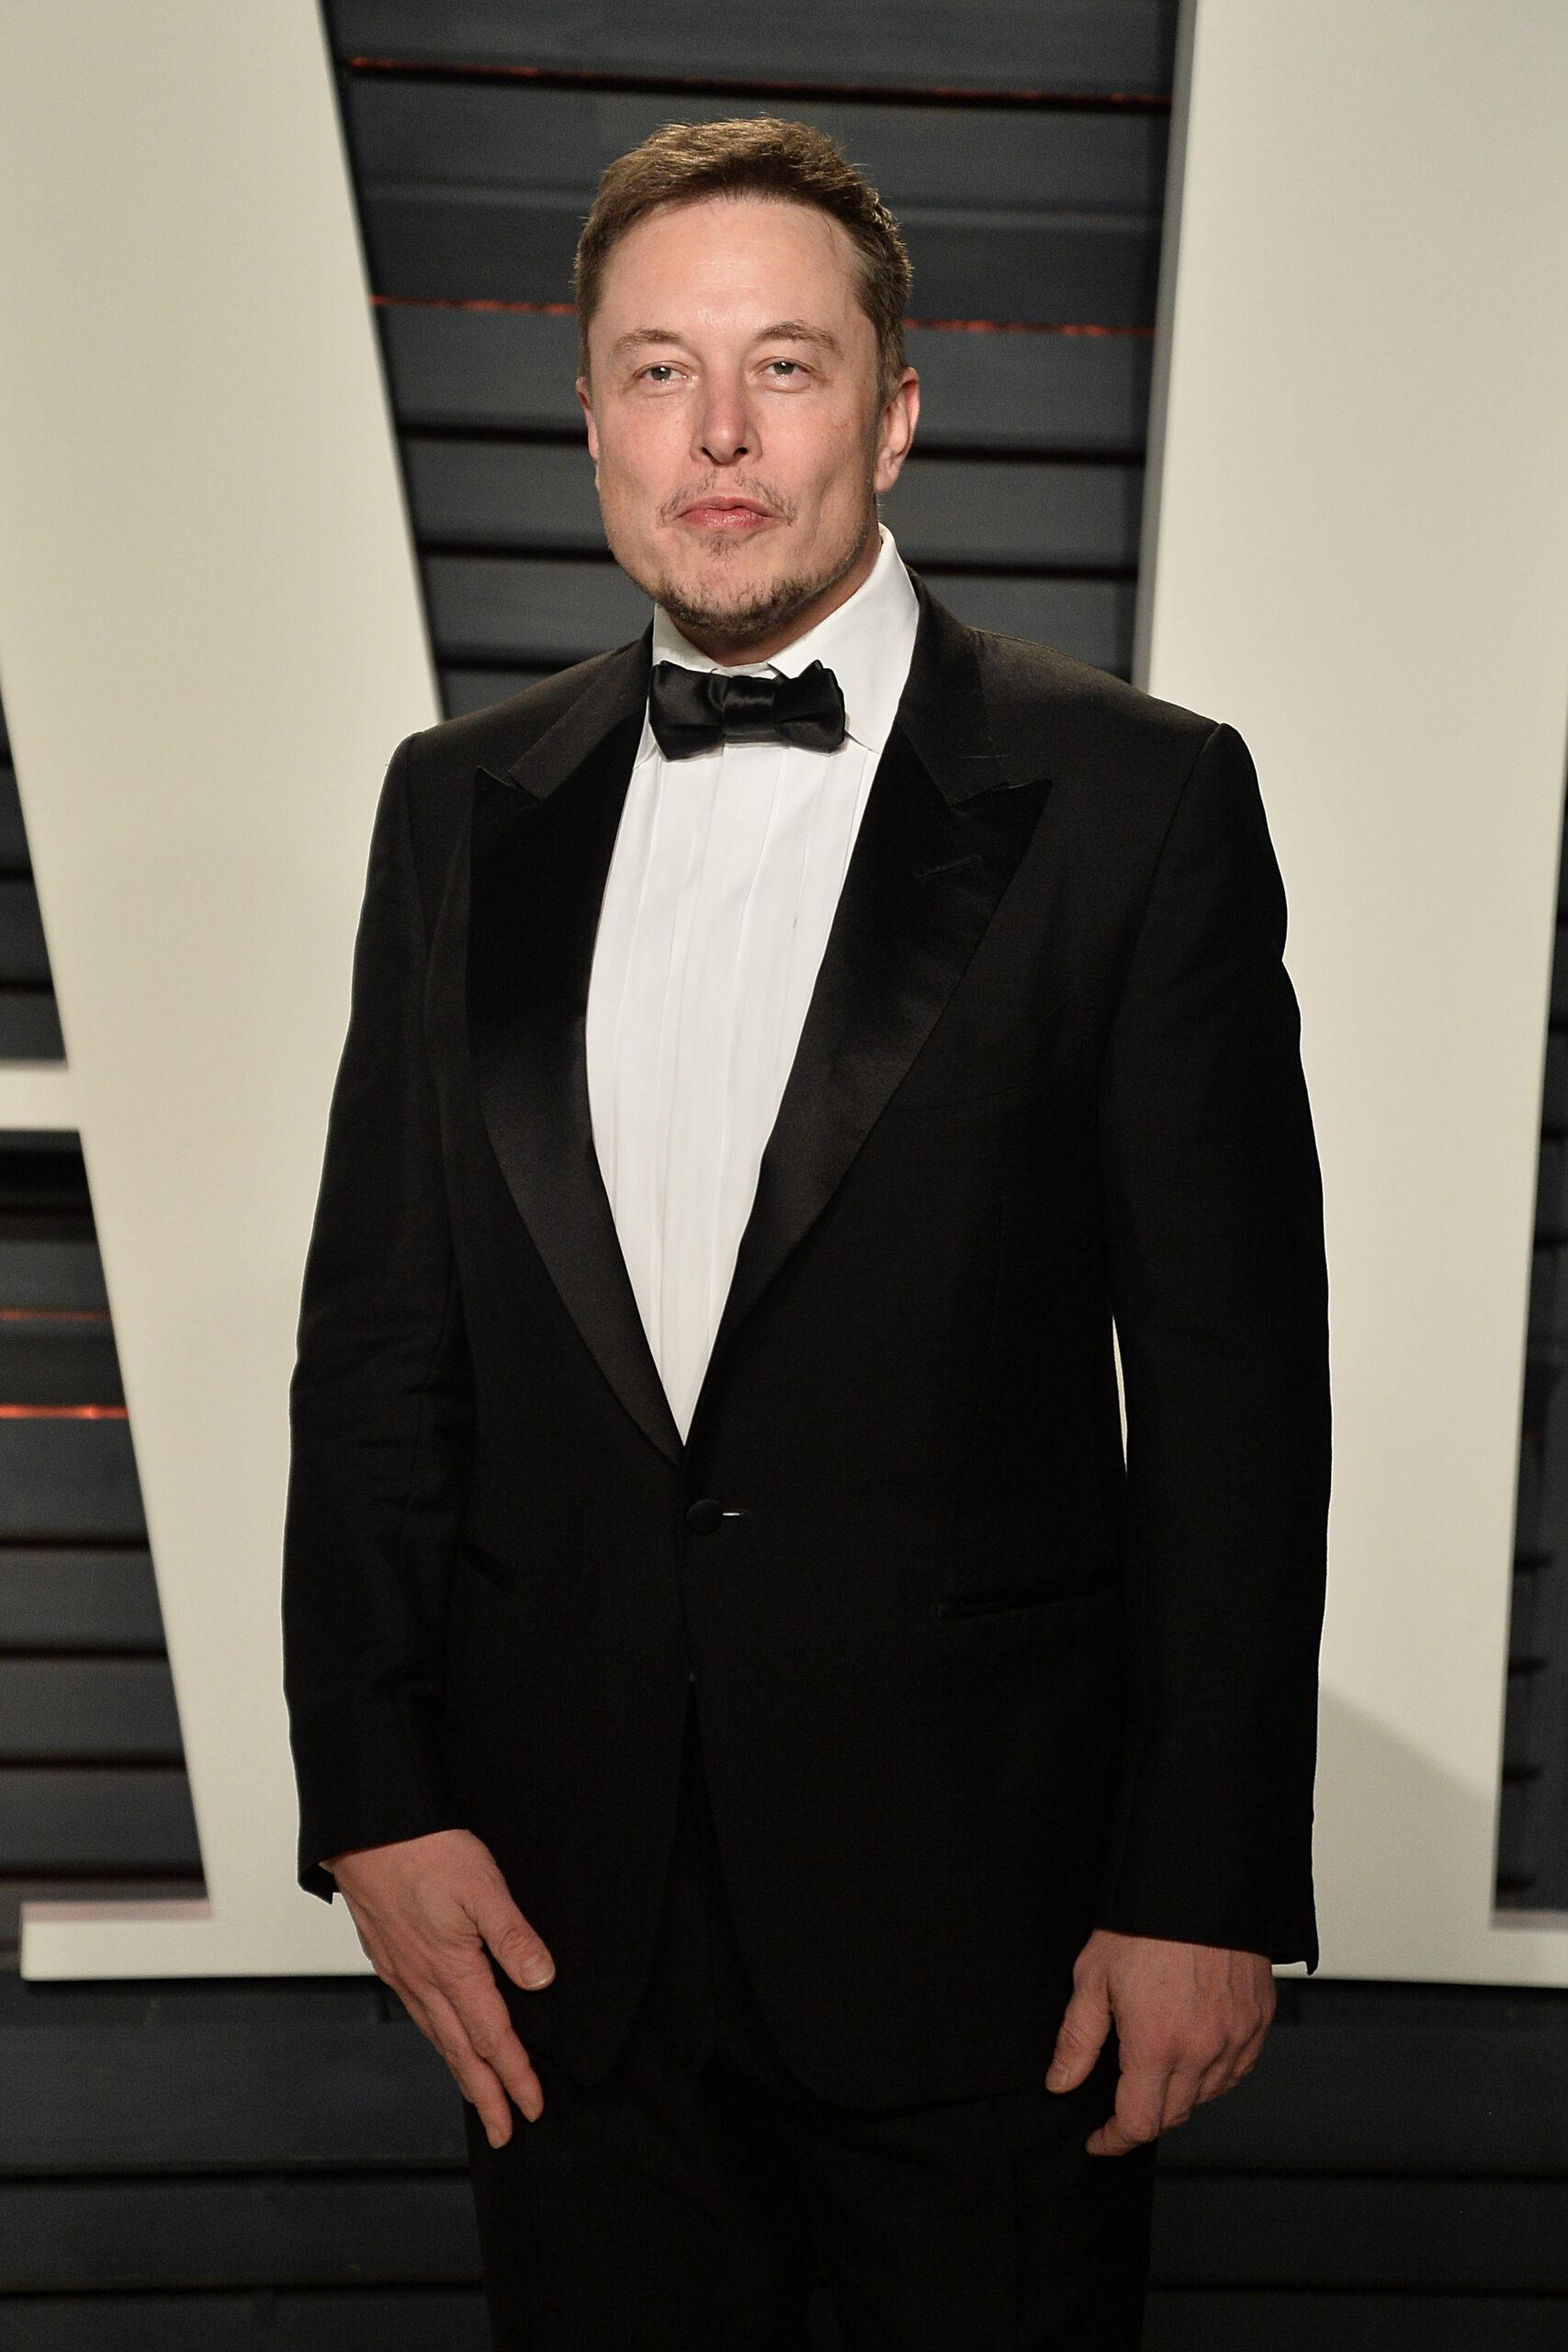 Elon Musk Arrivals at the Vanity Fair Oscar Party 2017 in Los Angeles